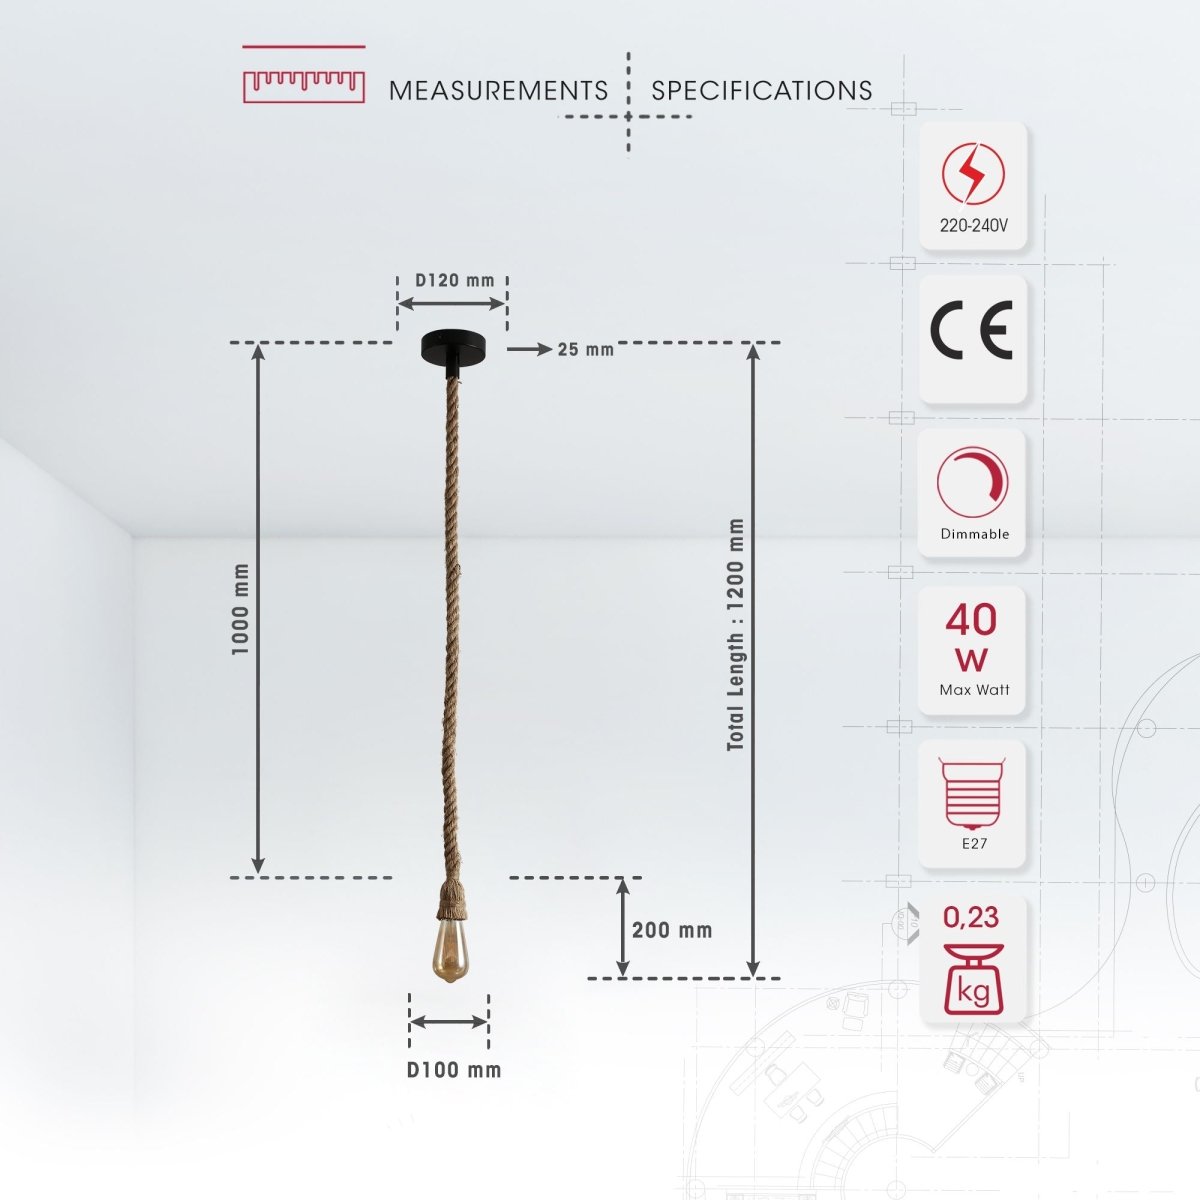 Product dimensions of hemp rope pendant light with e27 fitting